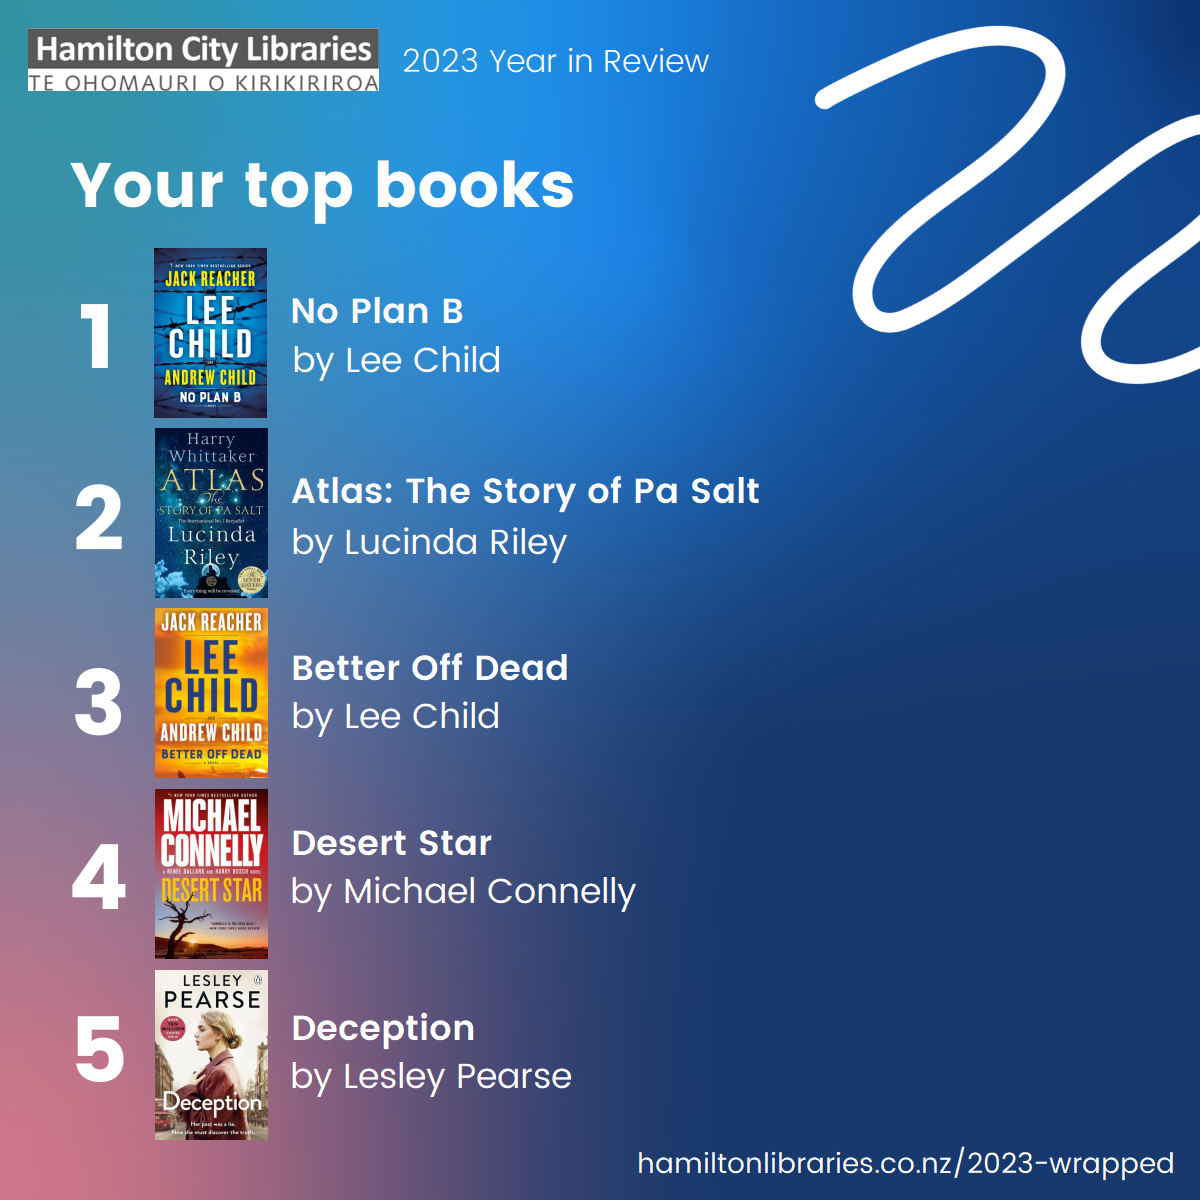 Top 5 books: No Plan B by Lee Child, Atlas by Lucinda Riley, Better Off Dead by Lee Child, Desert Star by Michael Connelly, Deception by Lesley Pearse